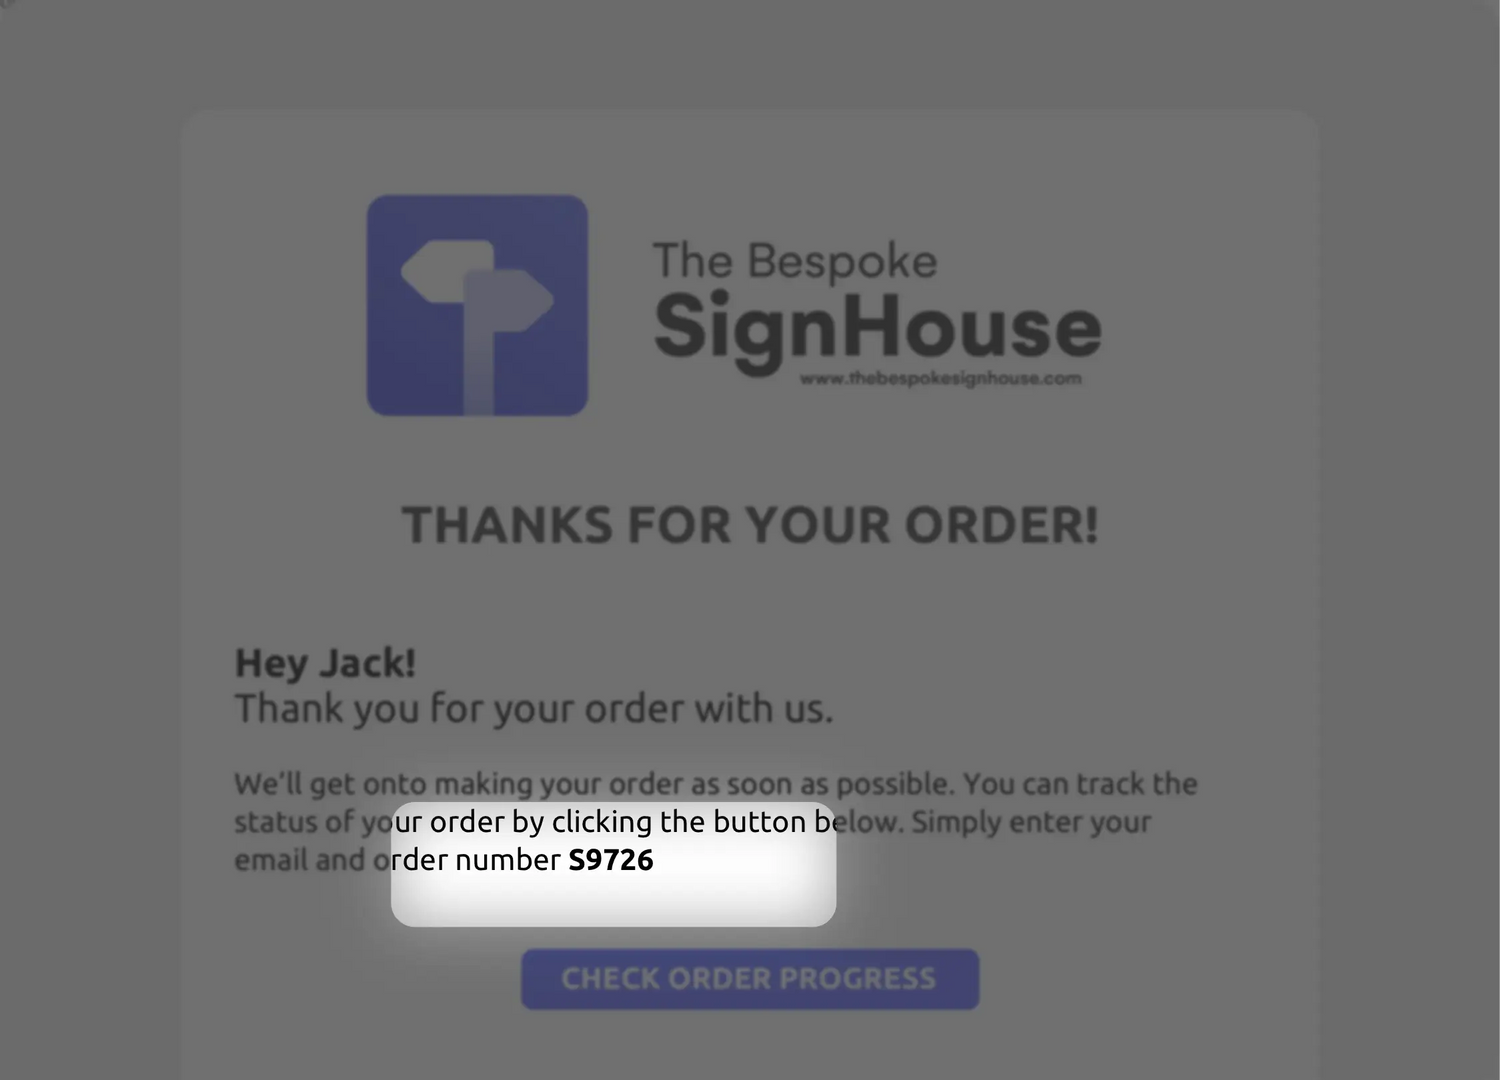 screenshot of the bespoke sign house order confirmation email with the order number circled in red on the bottom right